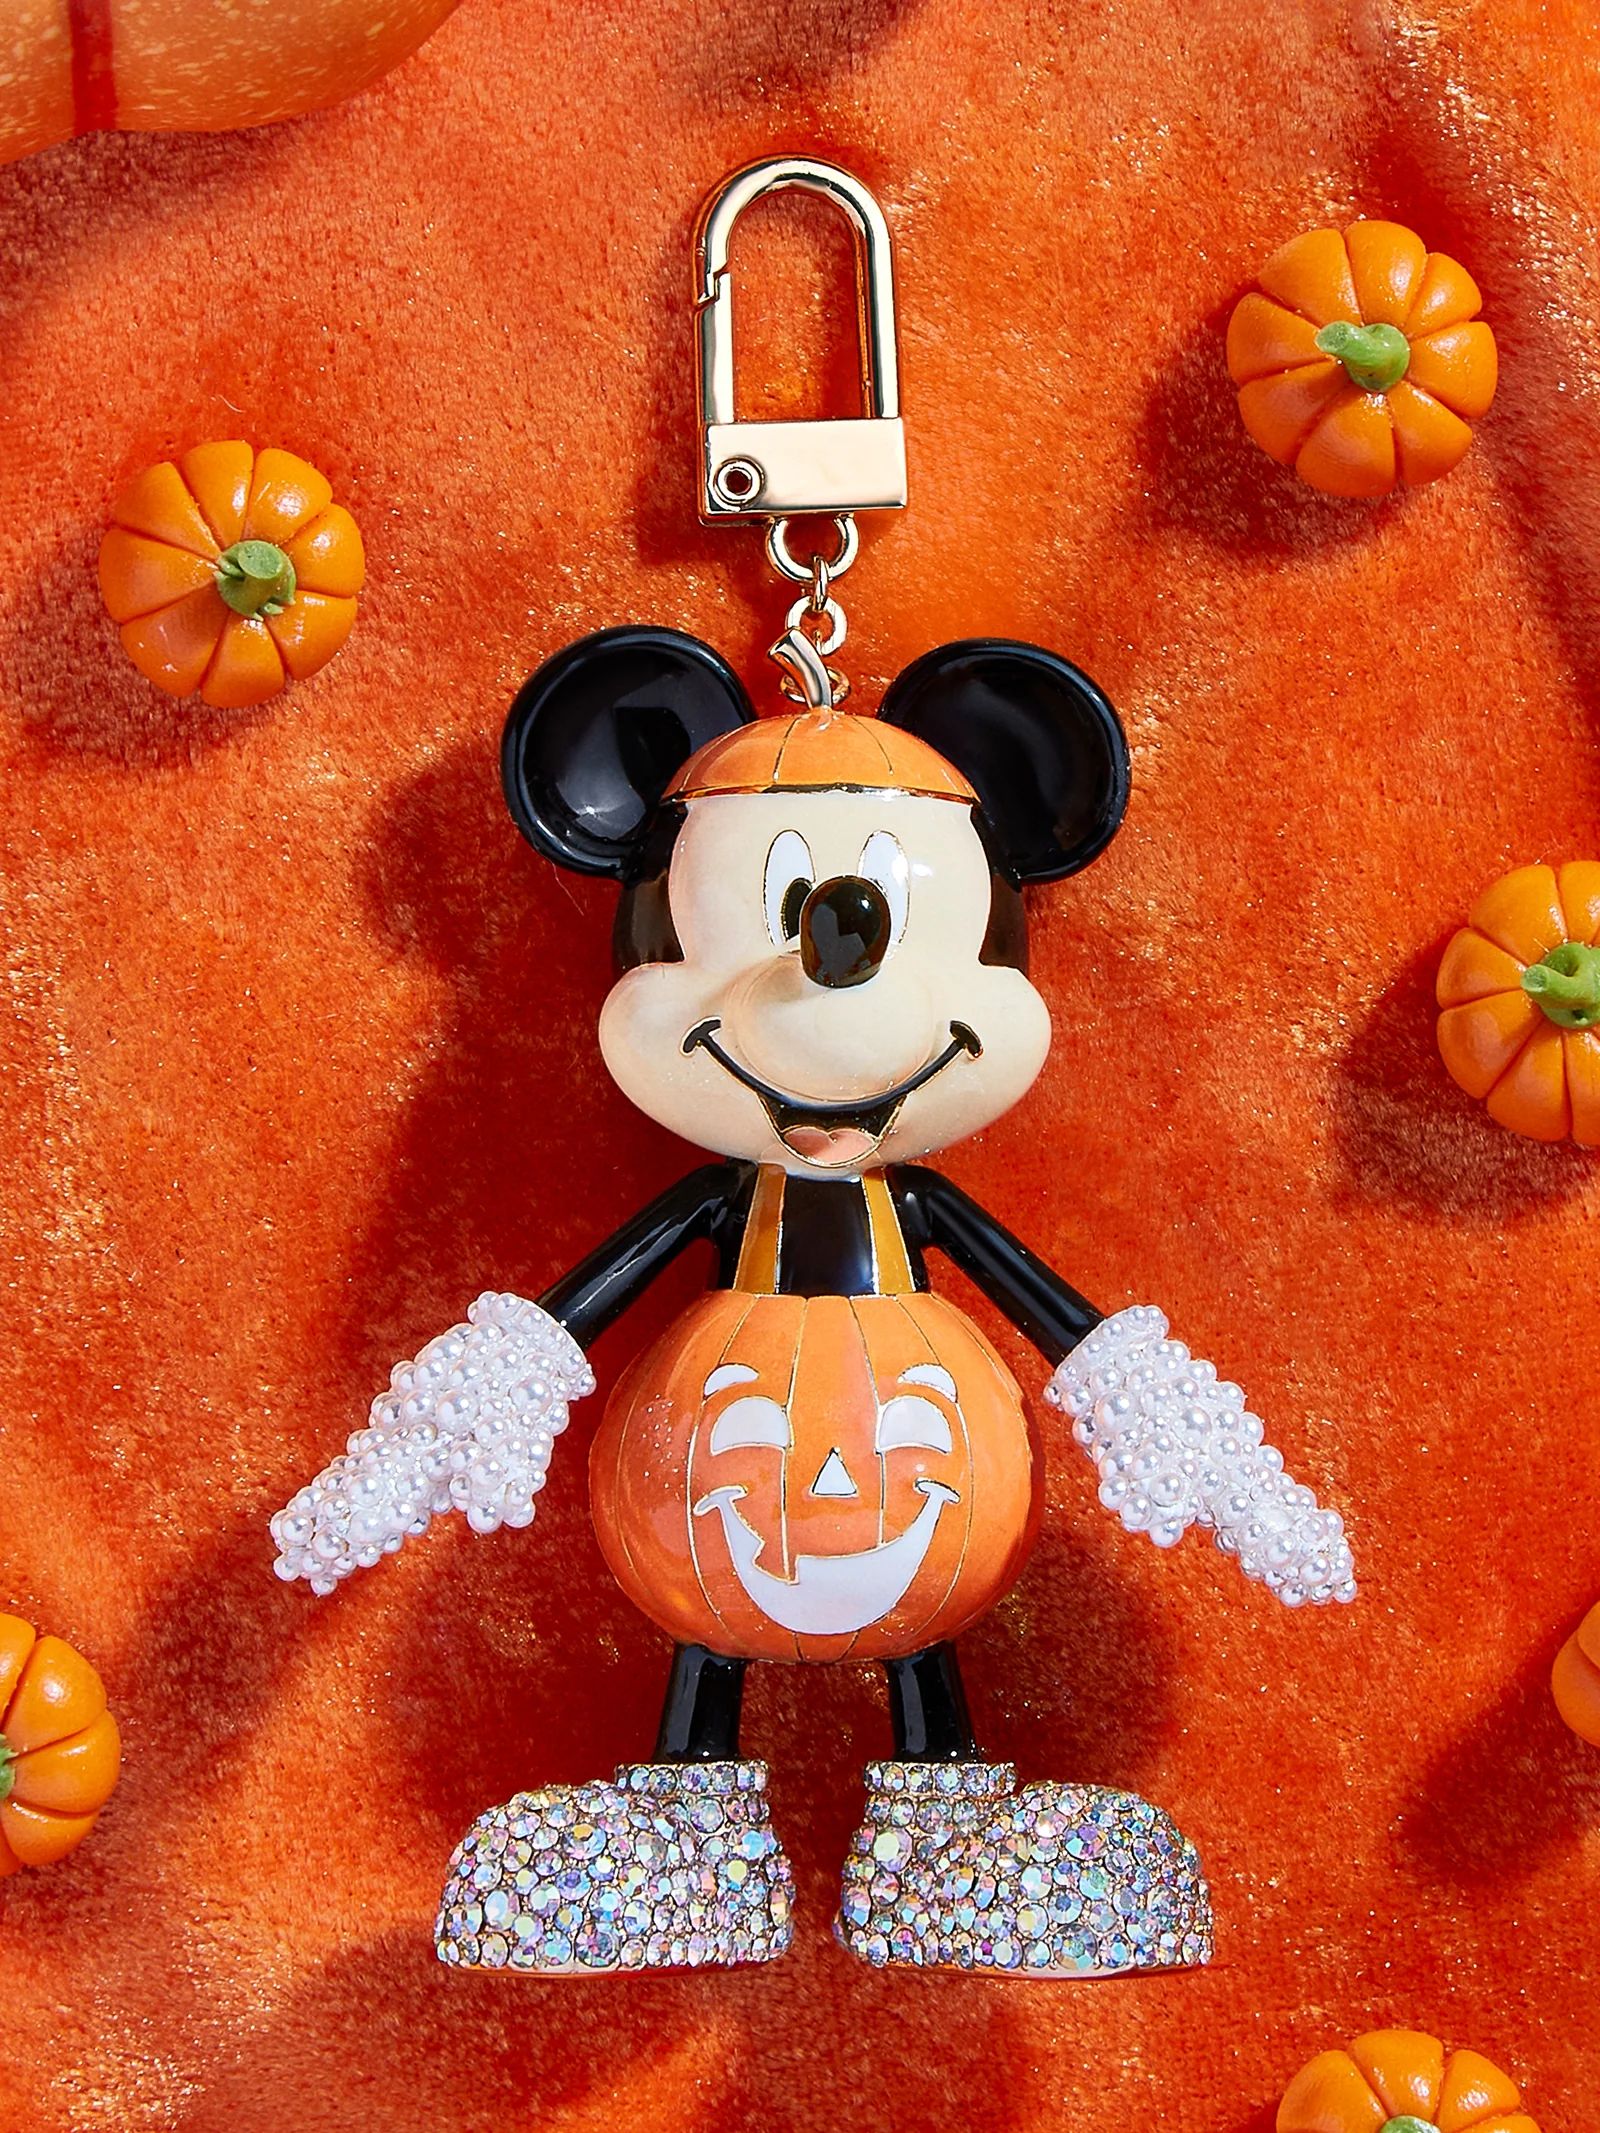 Mickey Mouse Disney Glow-In-The-Dark Bag Charm - Glow-In-The-Dark Mickey Mouse Pumpkin | BaubleBar (US)